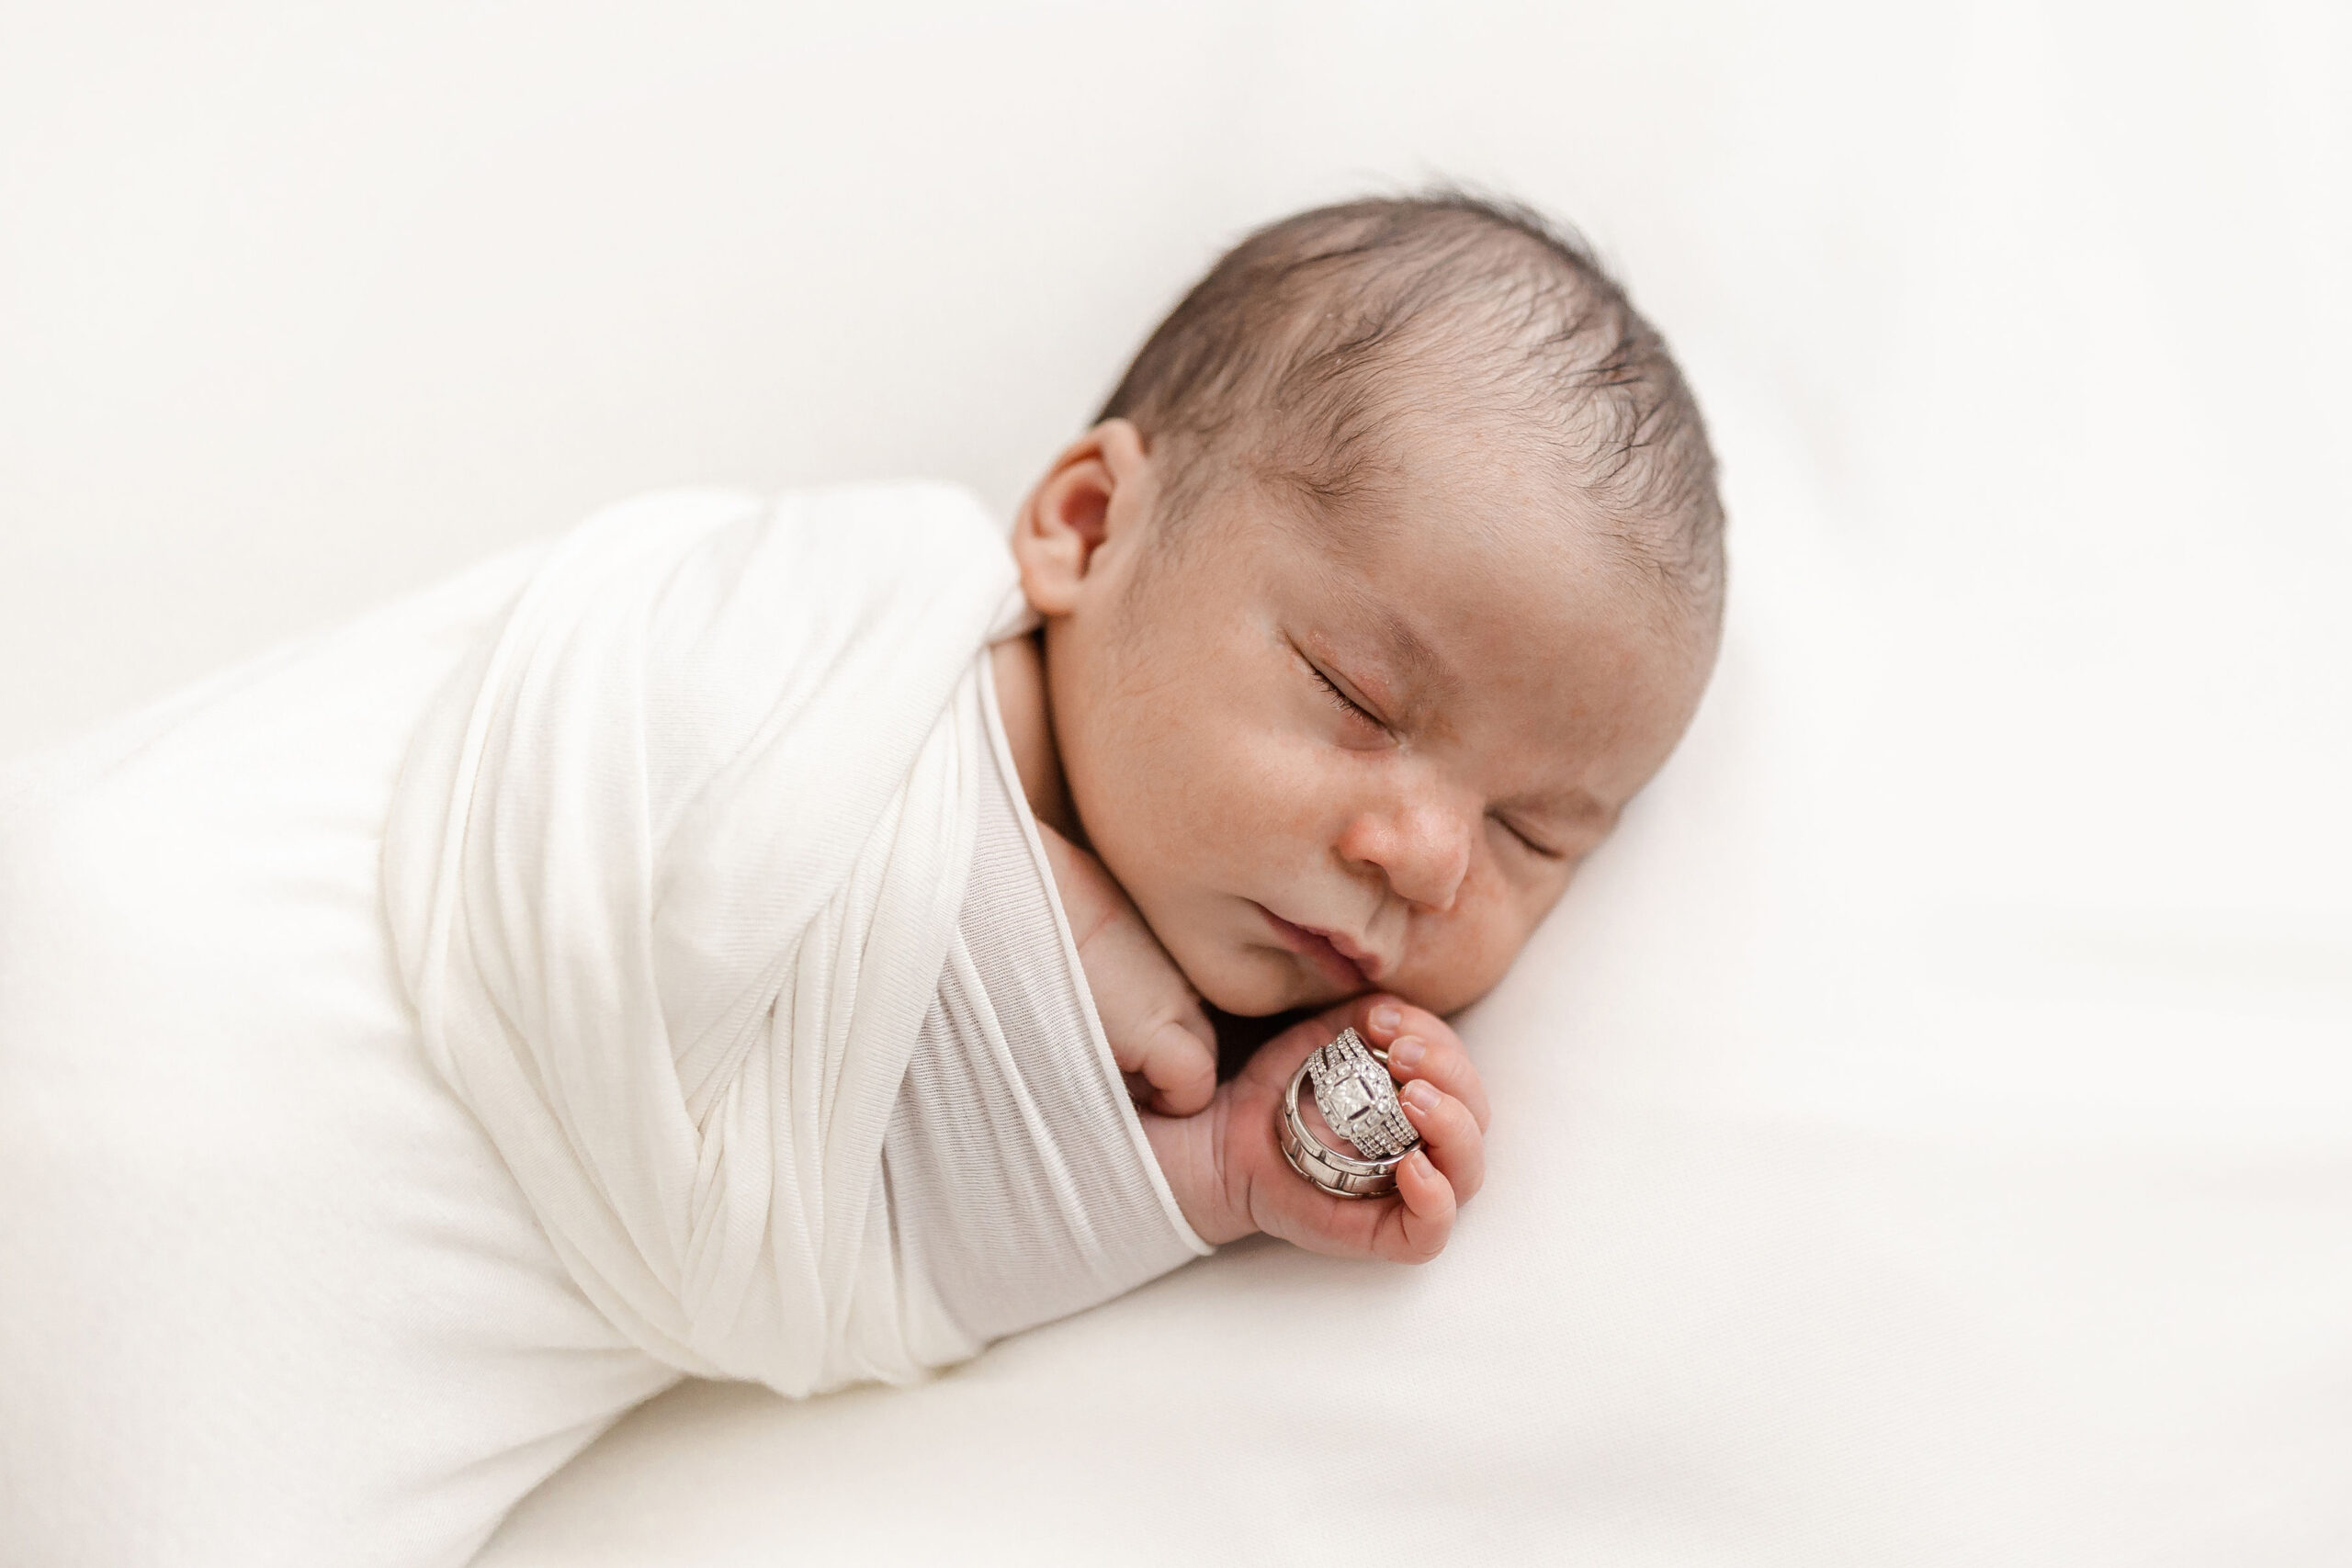 A newborn baby sleeps in a white swaddle on a bed while holding mom and dad's wedding bands spirit of life midwifery